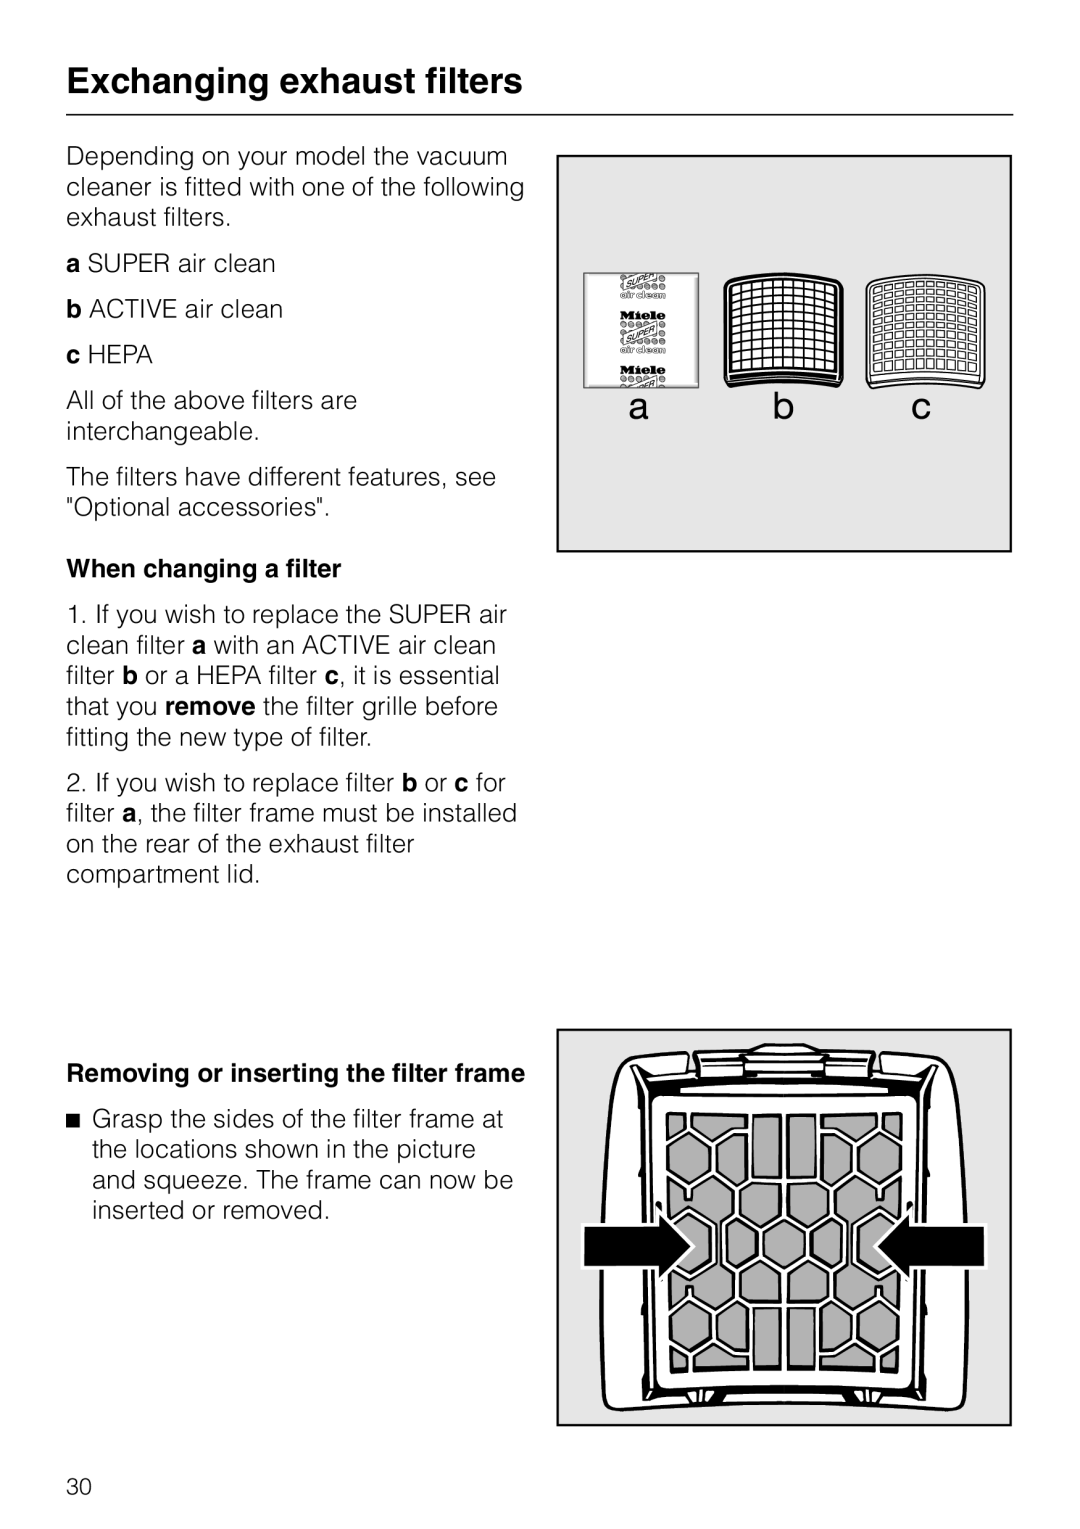 Miele S 140 S 160 manual Exchanging exhaust filters, When changing a filter, Removing or inserting the filter frame 